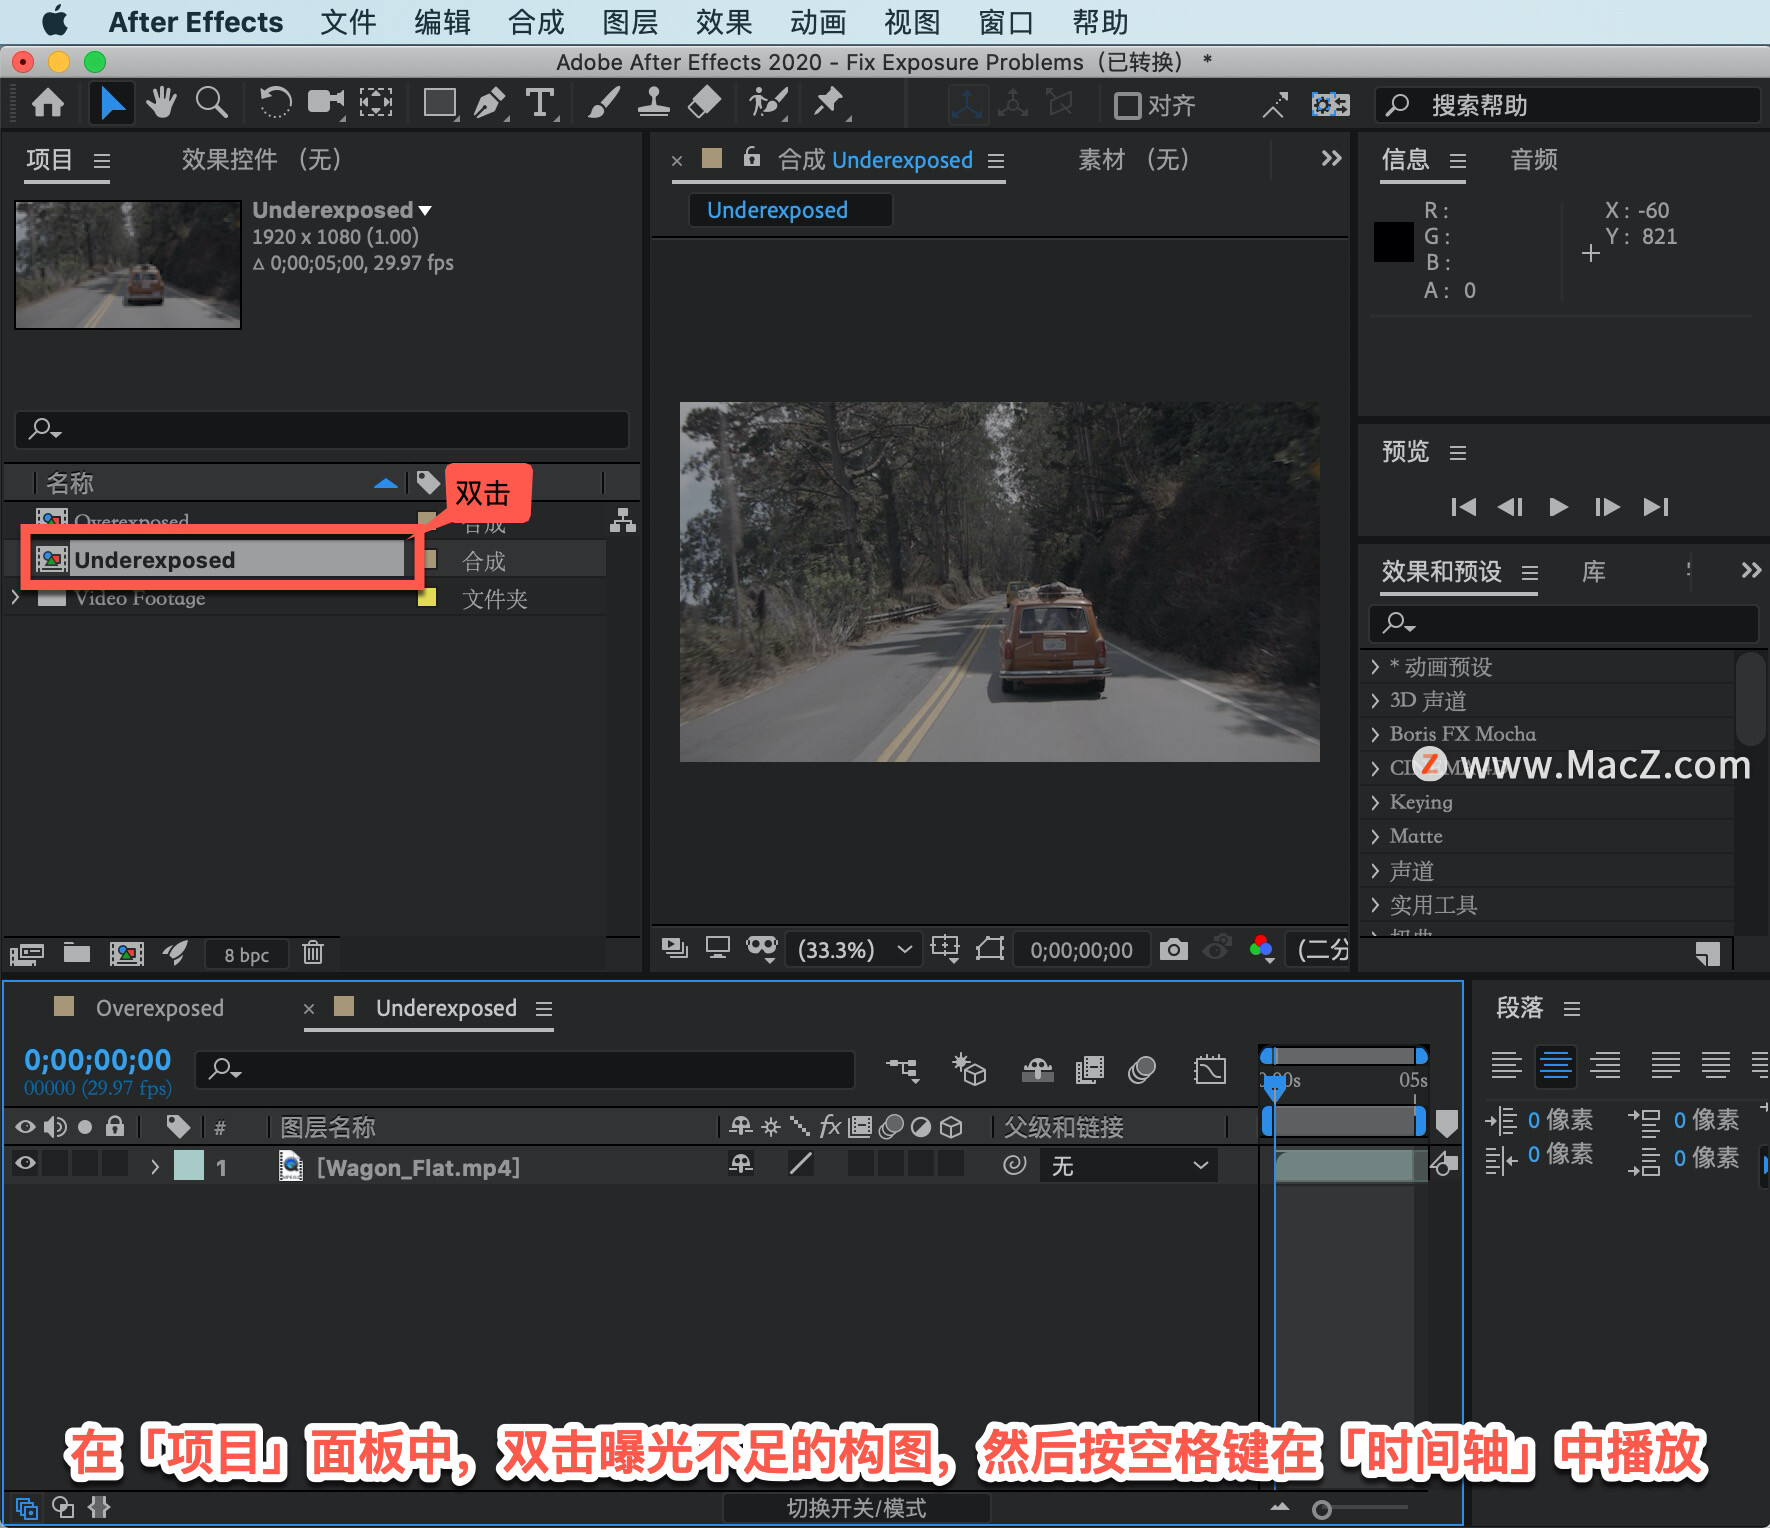 After Effects 教程「21」，如何在 After Effects 中修复曝光不足的镜头？